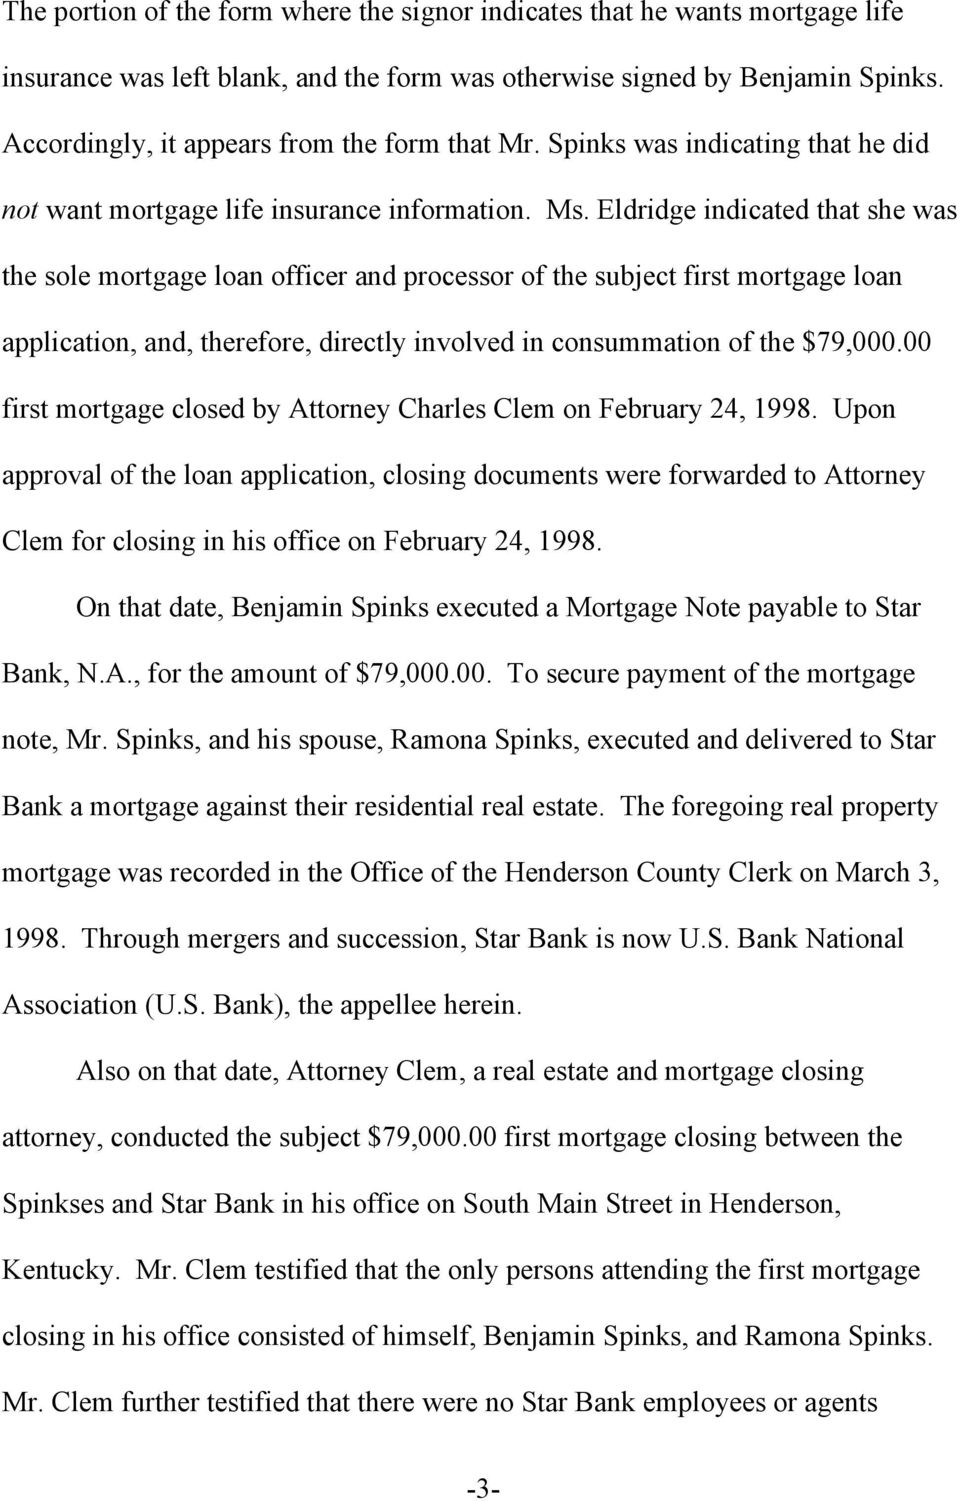 Eldridge indicated that she was the sole mortgage loan officer and processor of the subject first mortgage loan application, and, therefore, directly involved in consummation of the $79,000.